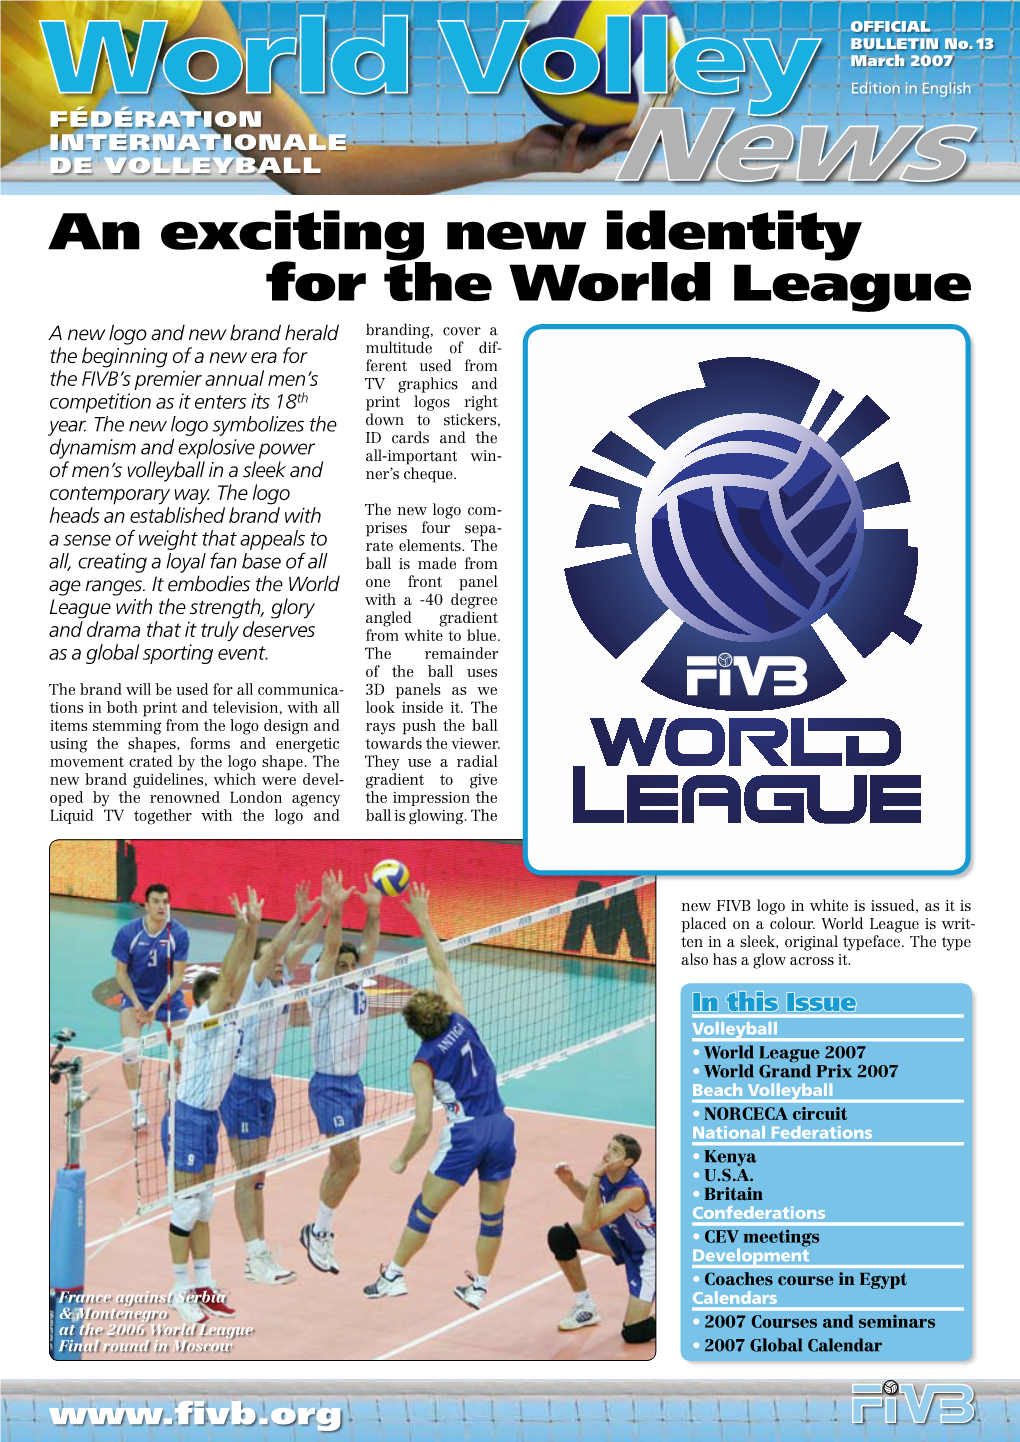 An Exciting New Identity for the World League